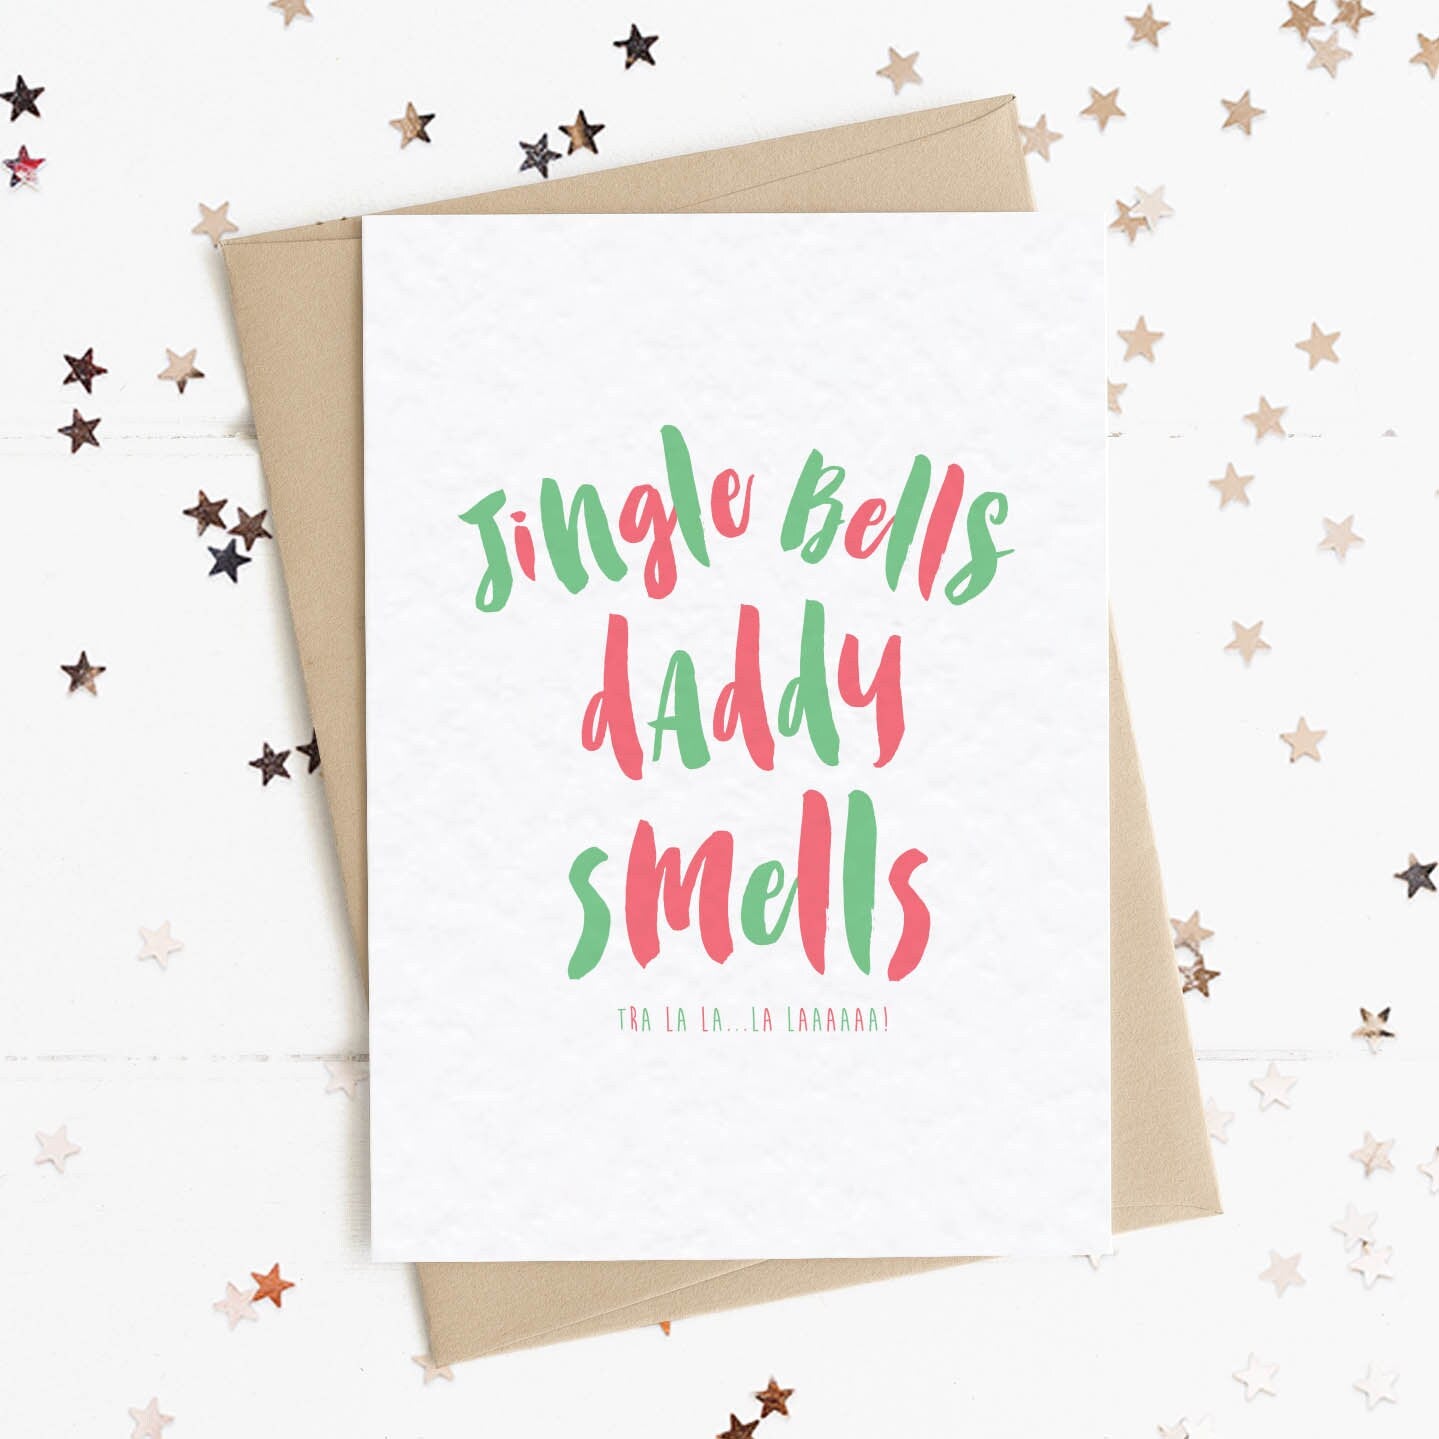 A funny Christmas card in festive colours and the message "Jingle Bells My Daddy Smells".